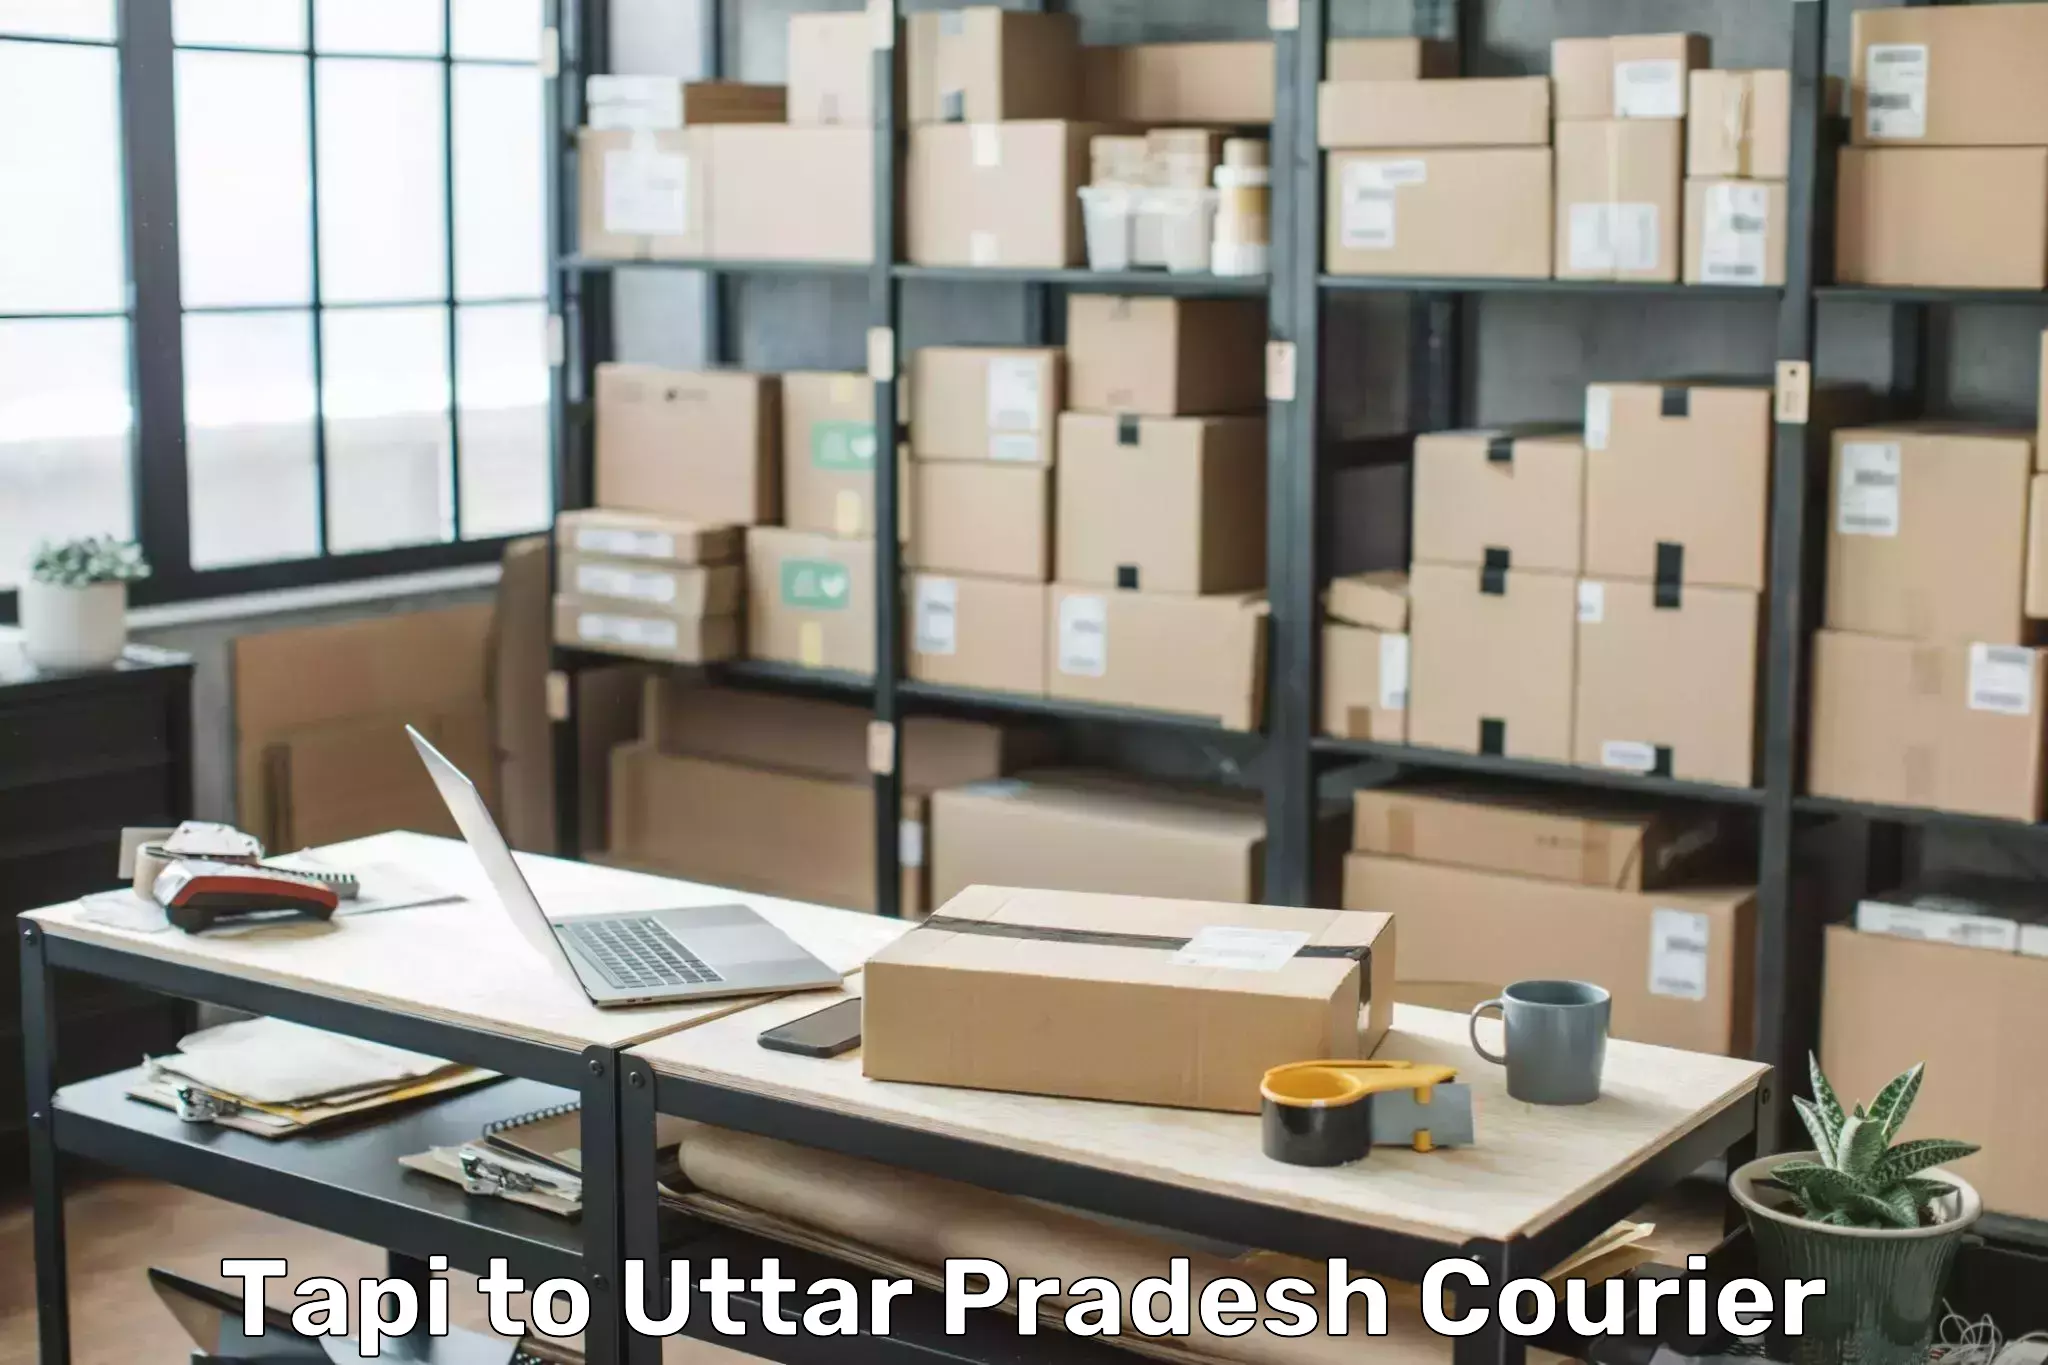 Instant baggage transport quote Tapi to Firozabad